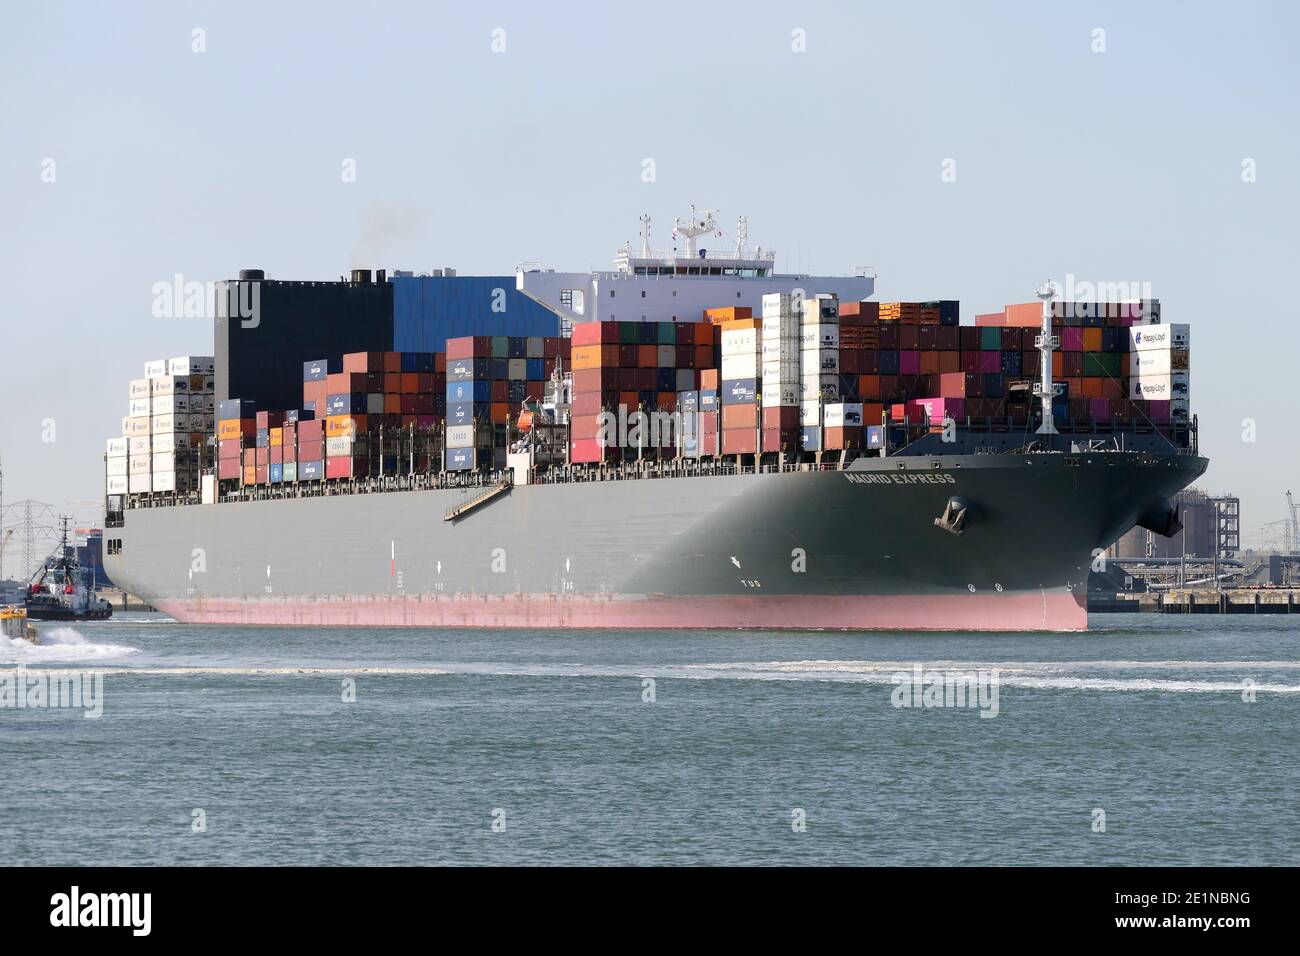 The container ship Madrid Express will leave the port of Rotterdam on September 18, 2020. Stock Photo